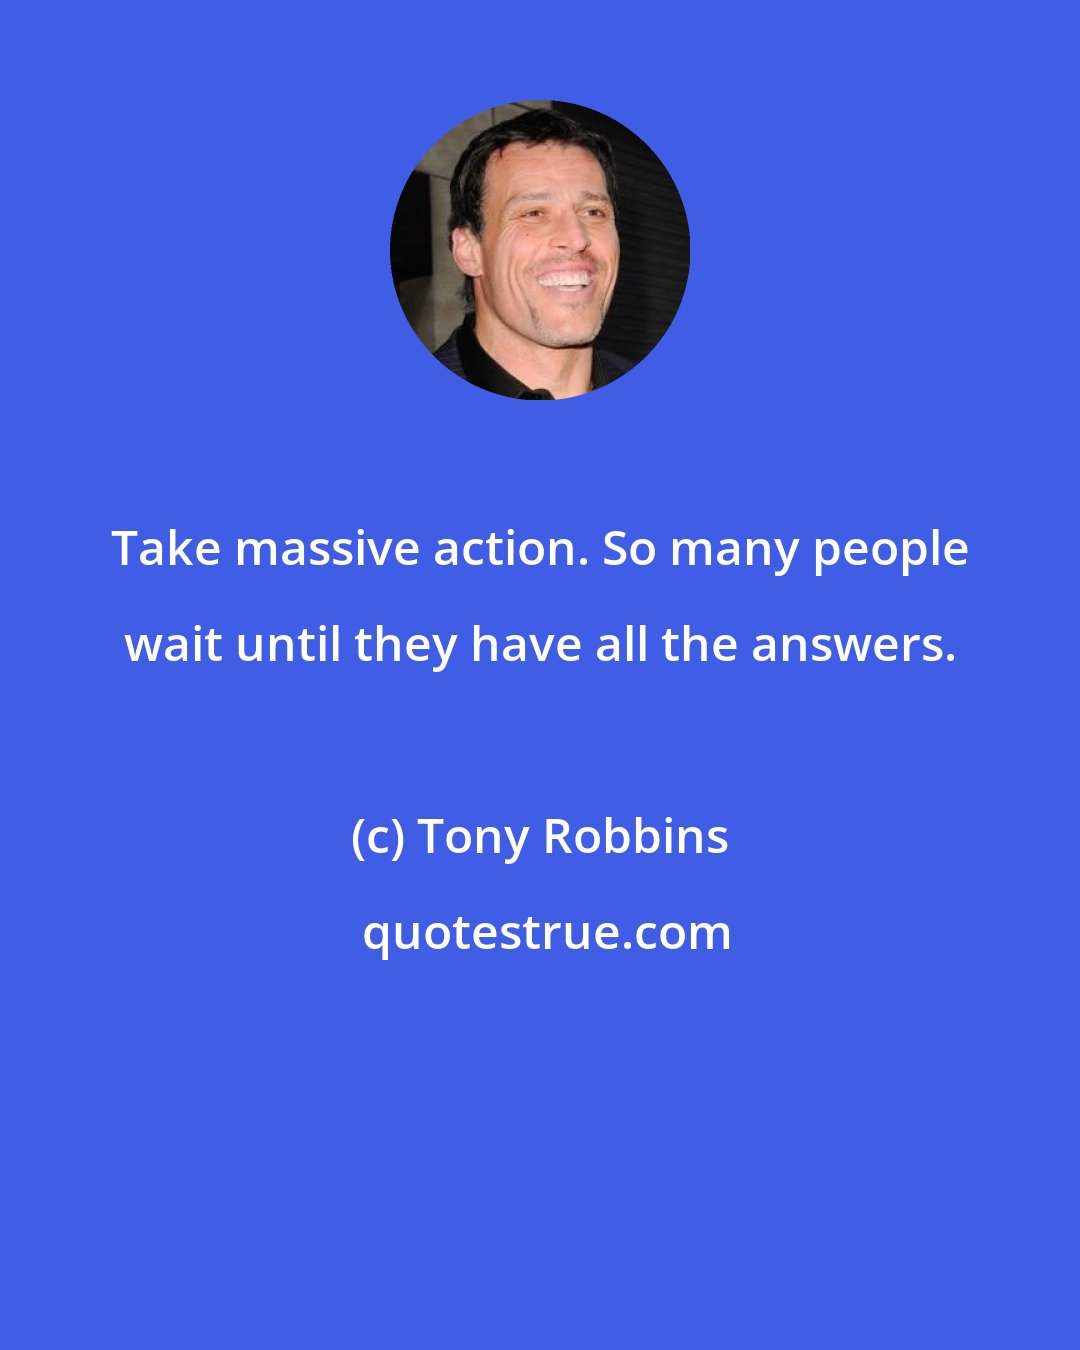 Tony Robbins: Take massive action. So many people wait until they have all the answers.